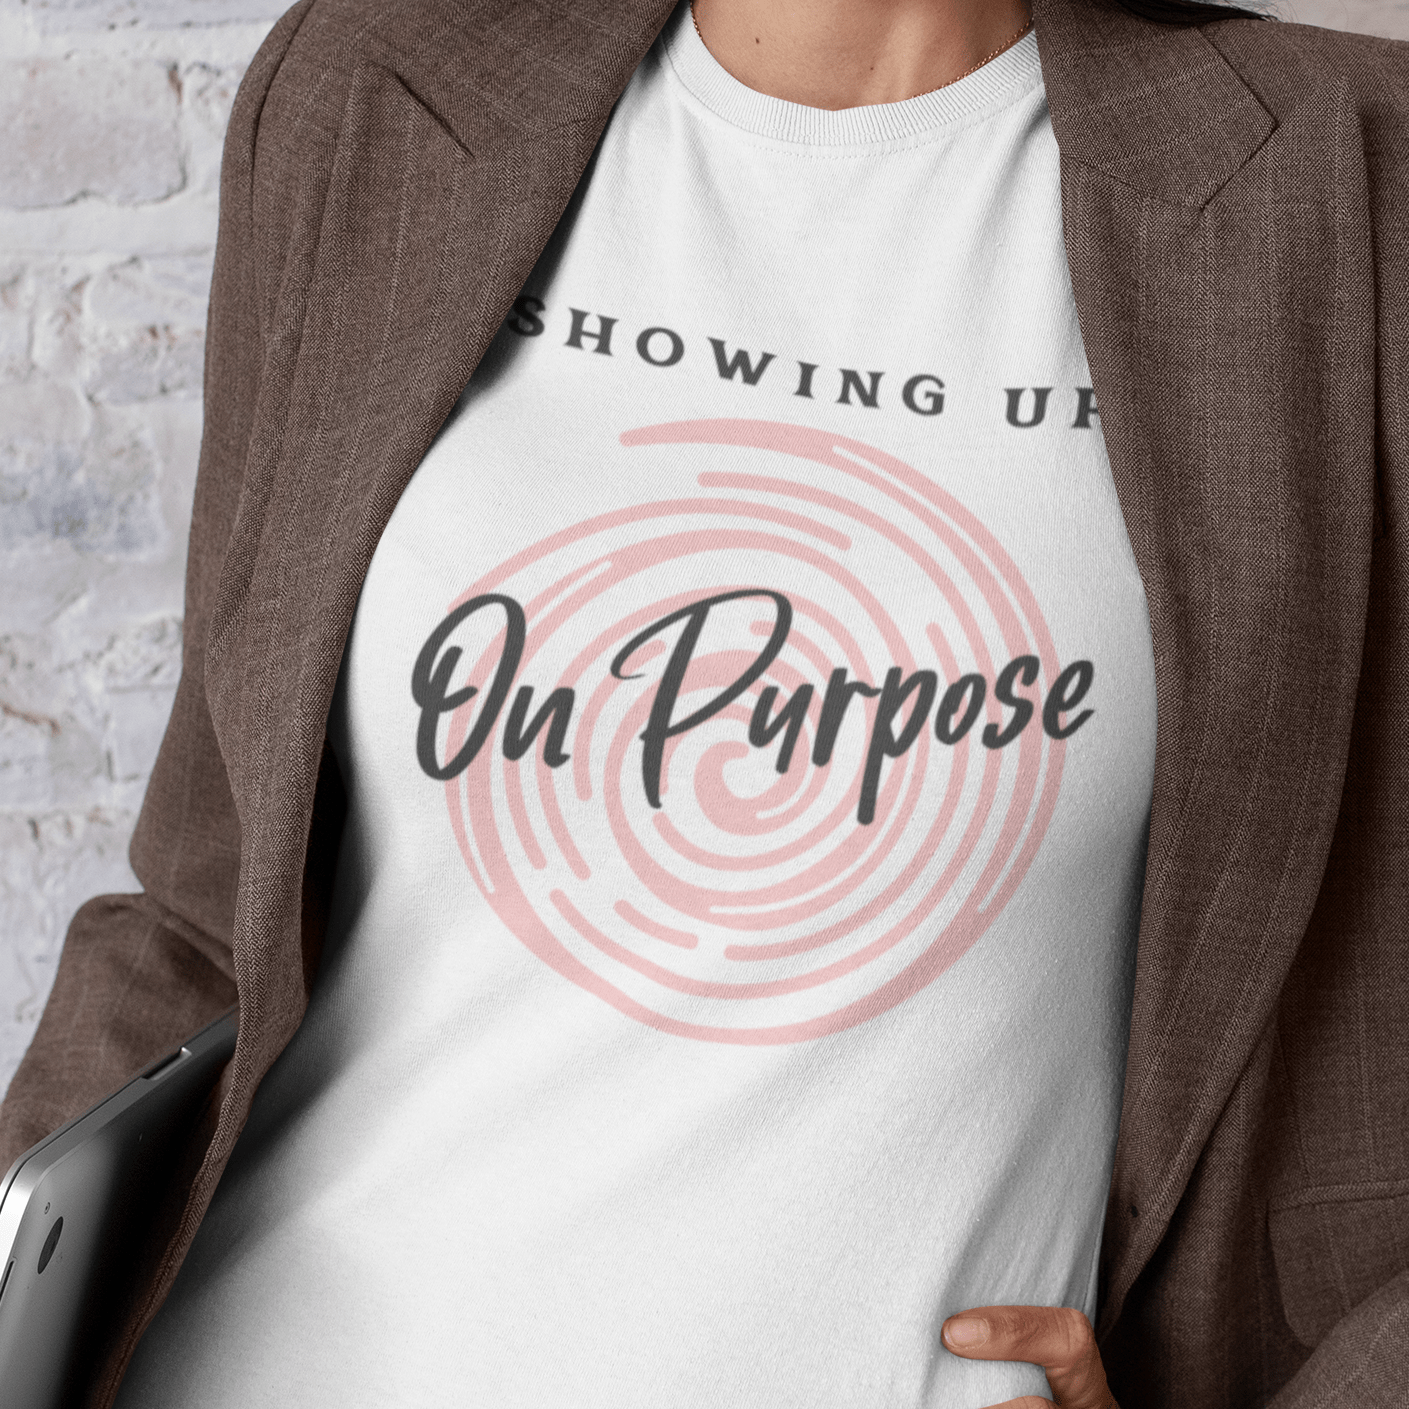 Showing Up On Purpose T-Shirt